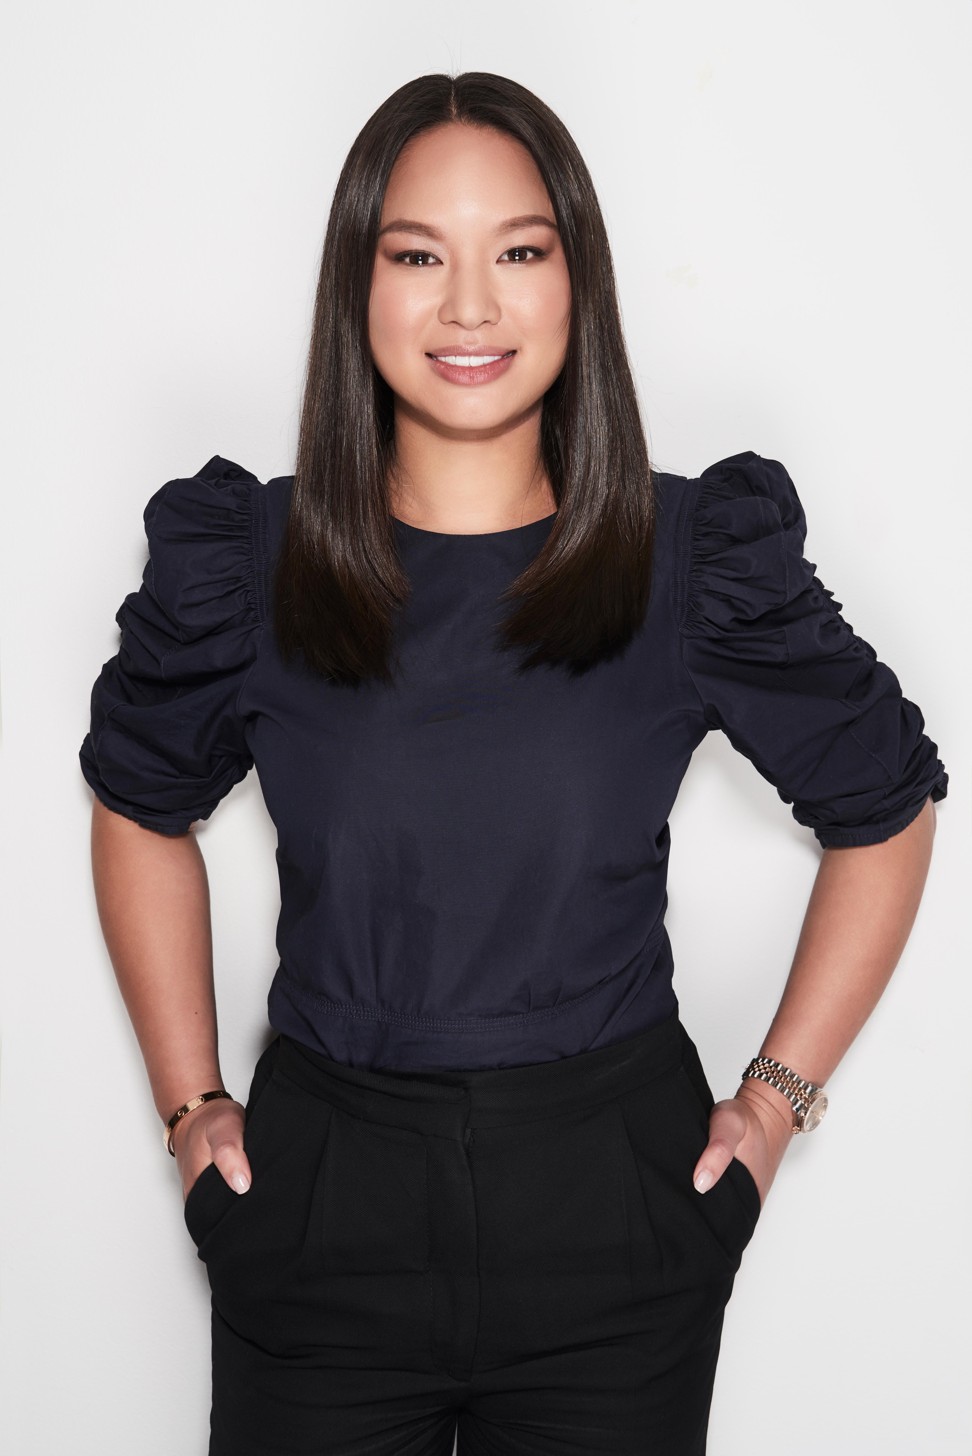 The Daily Edited’s co-founder Alyce Tran.